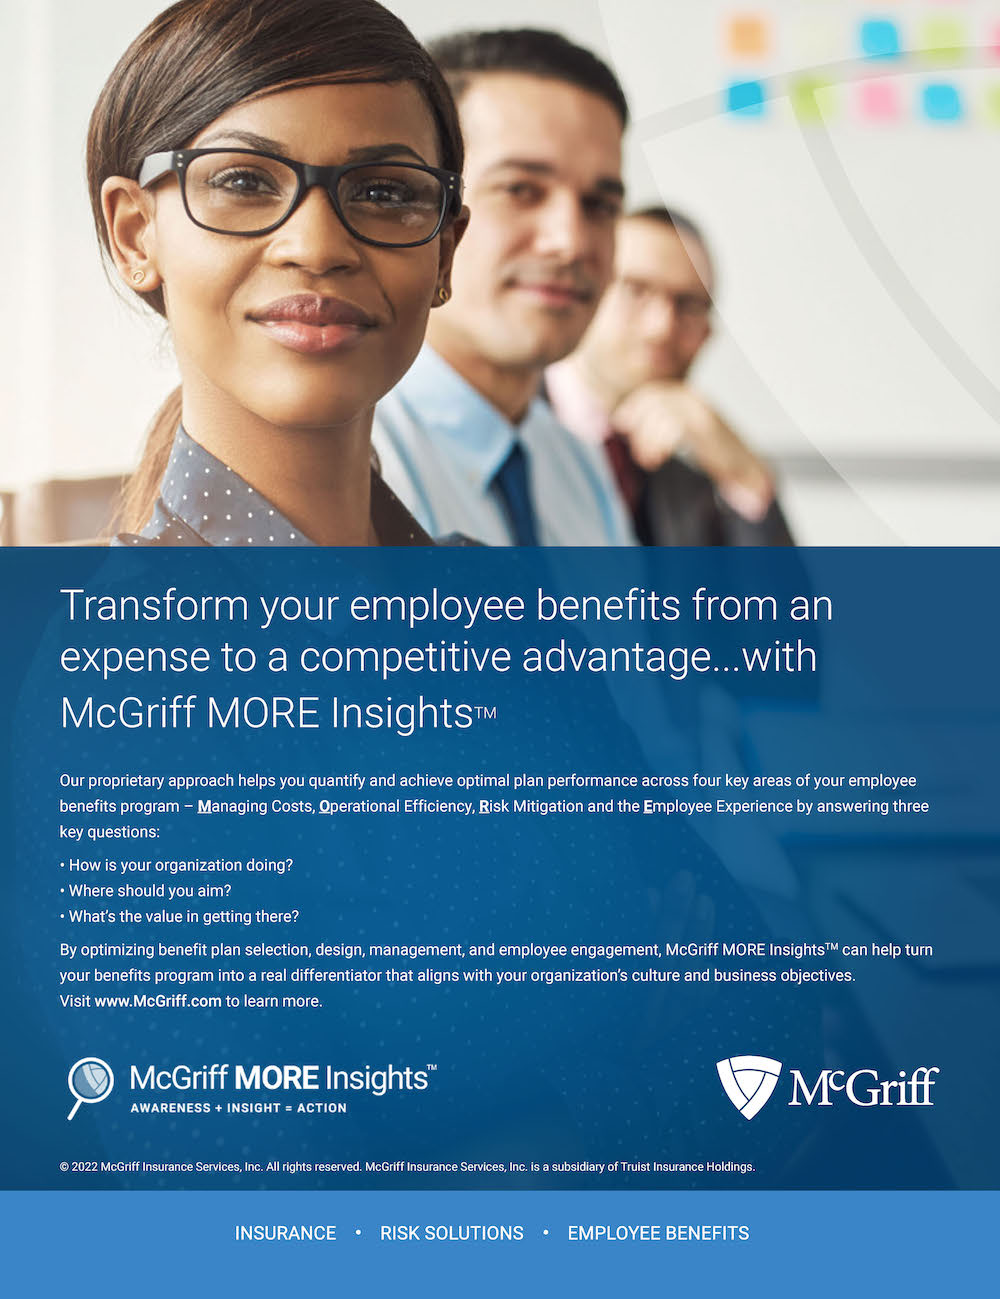 Transform Your Employee Benefits to a Competitive Advantage ...